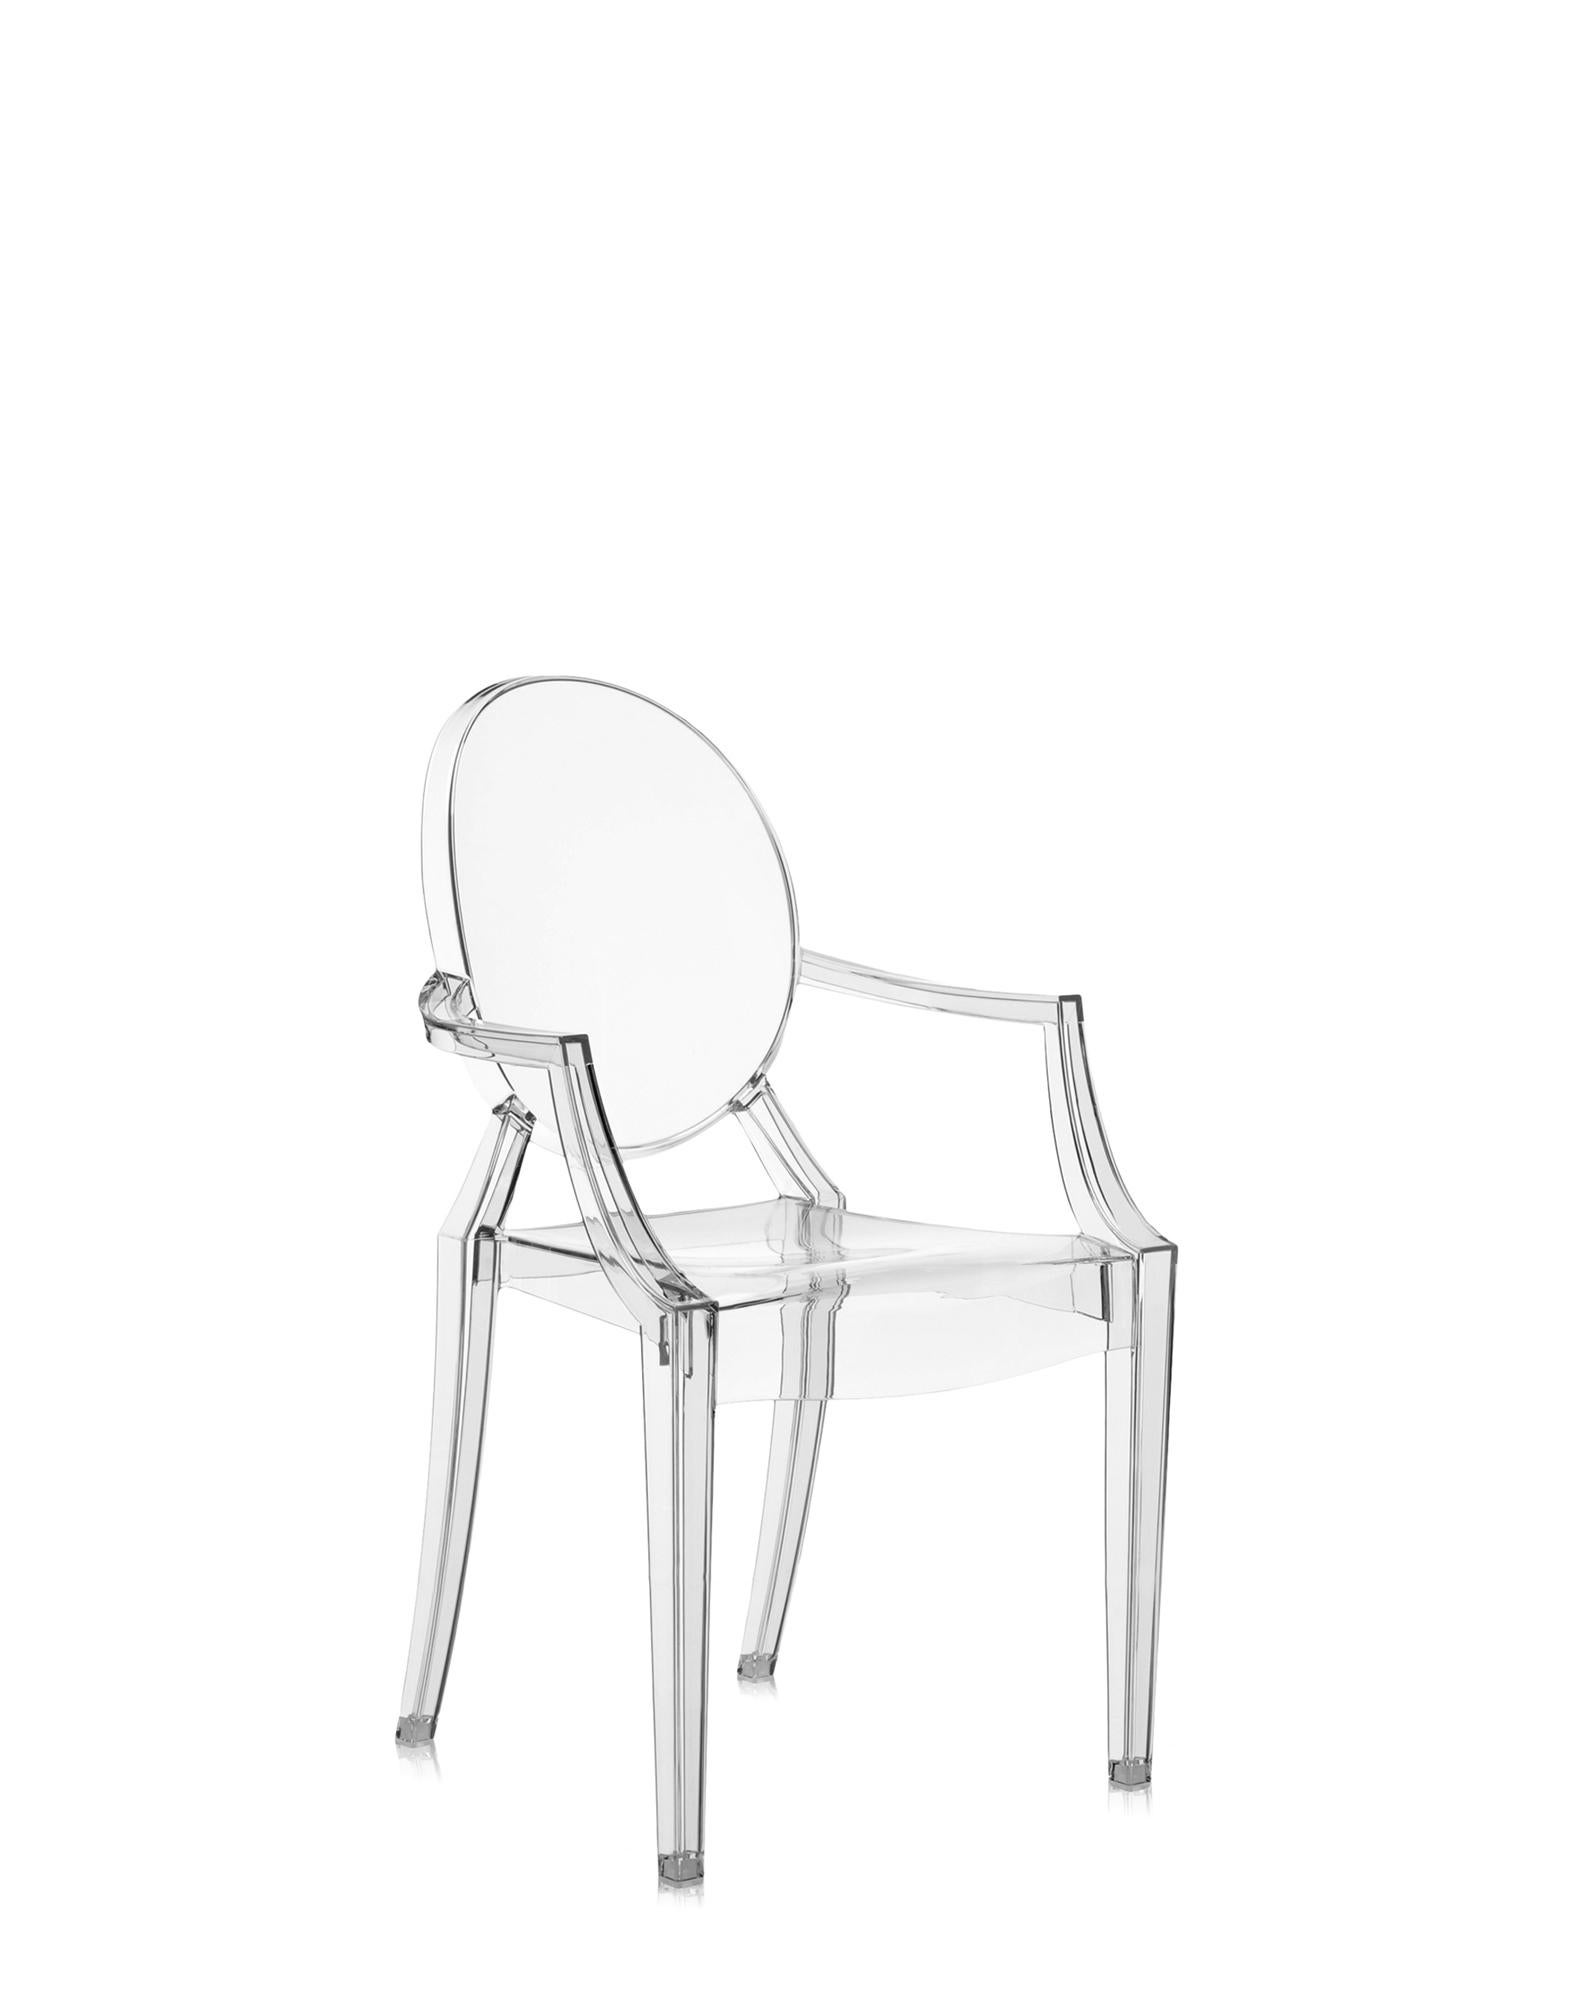 The miniature version of one of the most famous design chairs joins the Kartell Kids line in several new versions. Philippe Starck's Lou Lou Ghost gets new and customisable graphics for the fun world of kids.

Dimensions: Height: 24.75 in.;